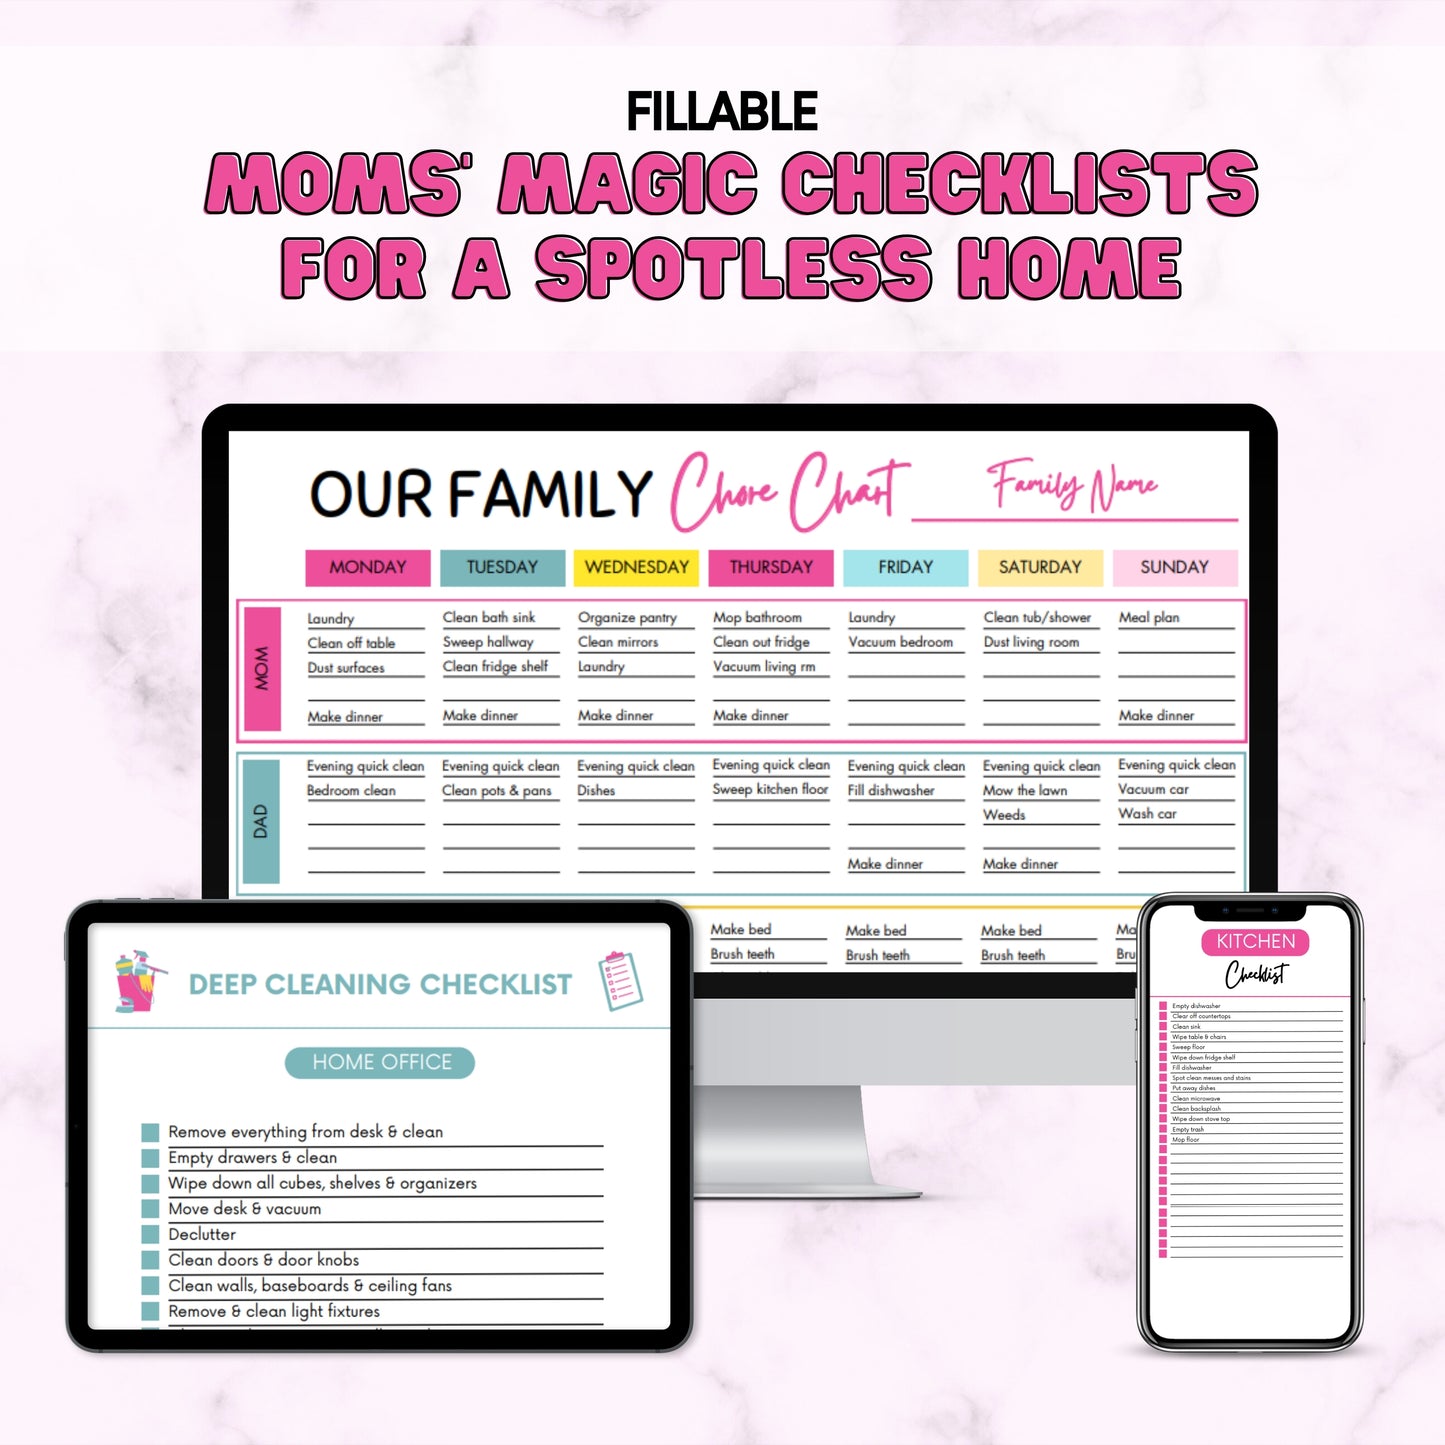 Moms' Magic Checklists for a Spotless Home